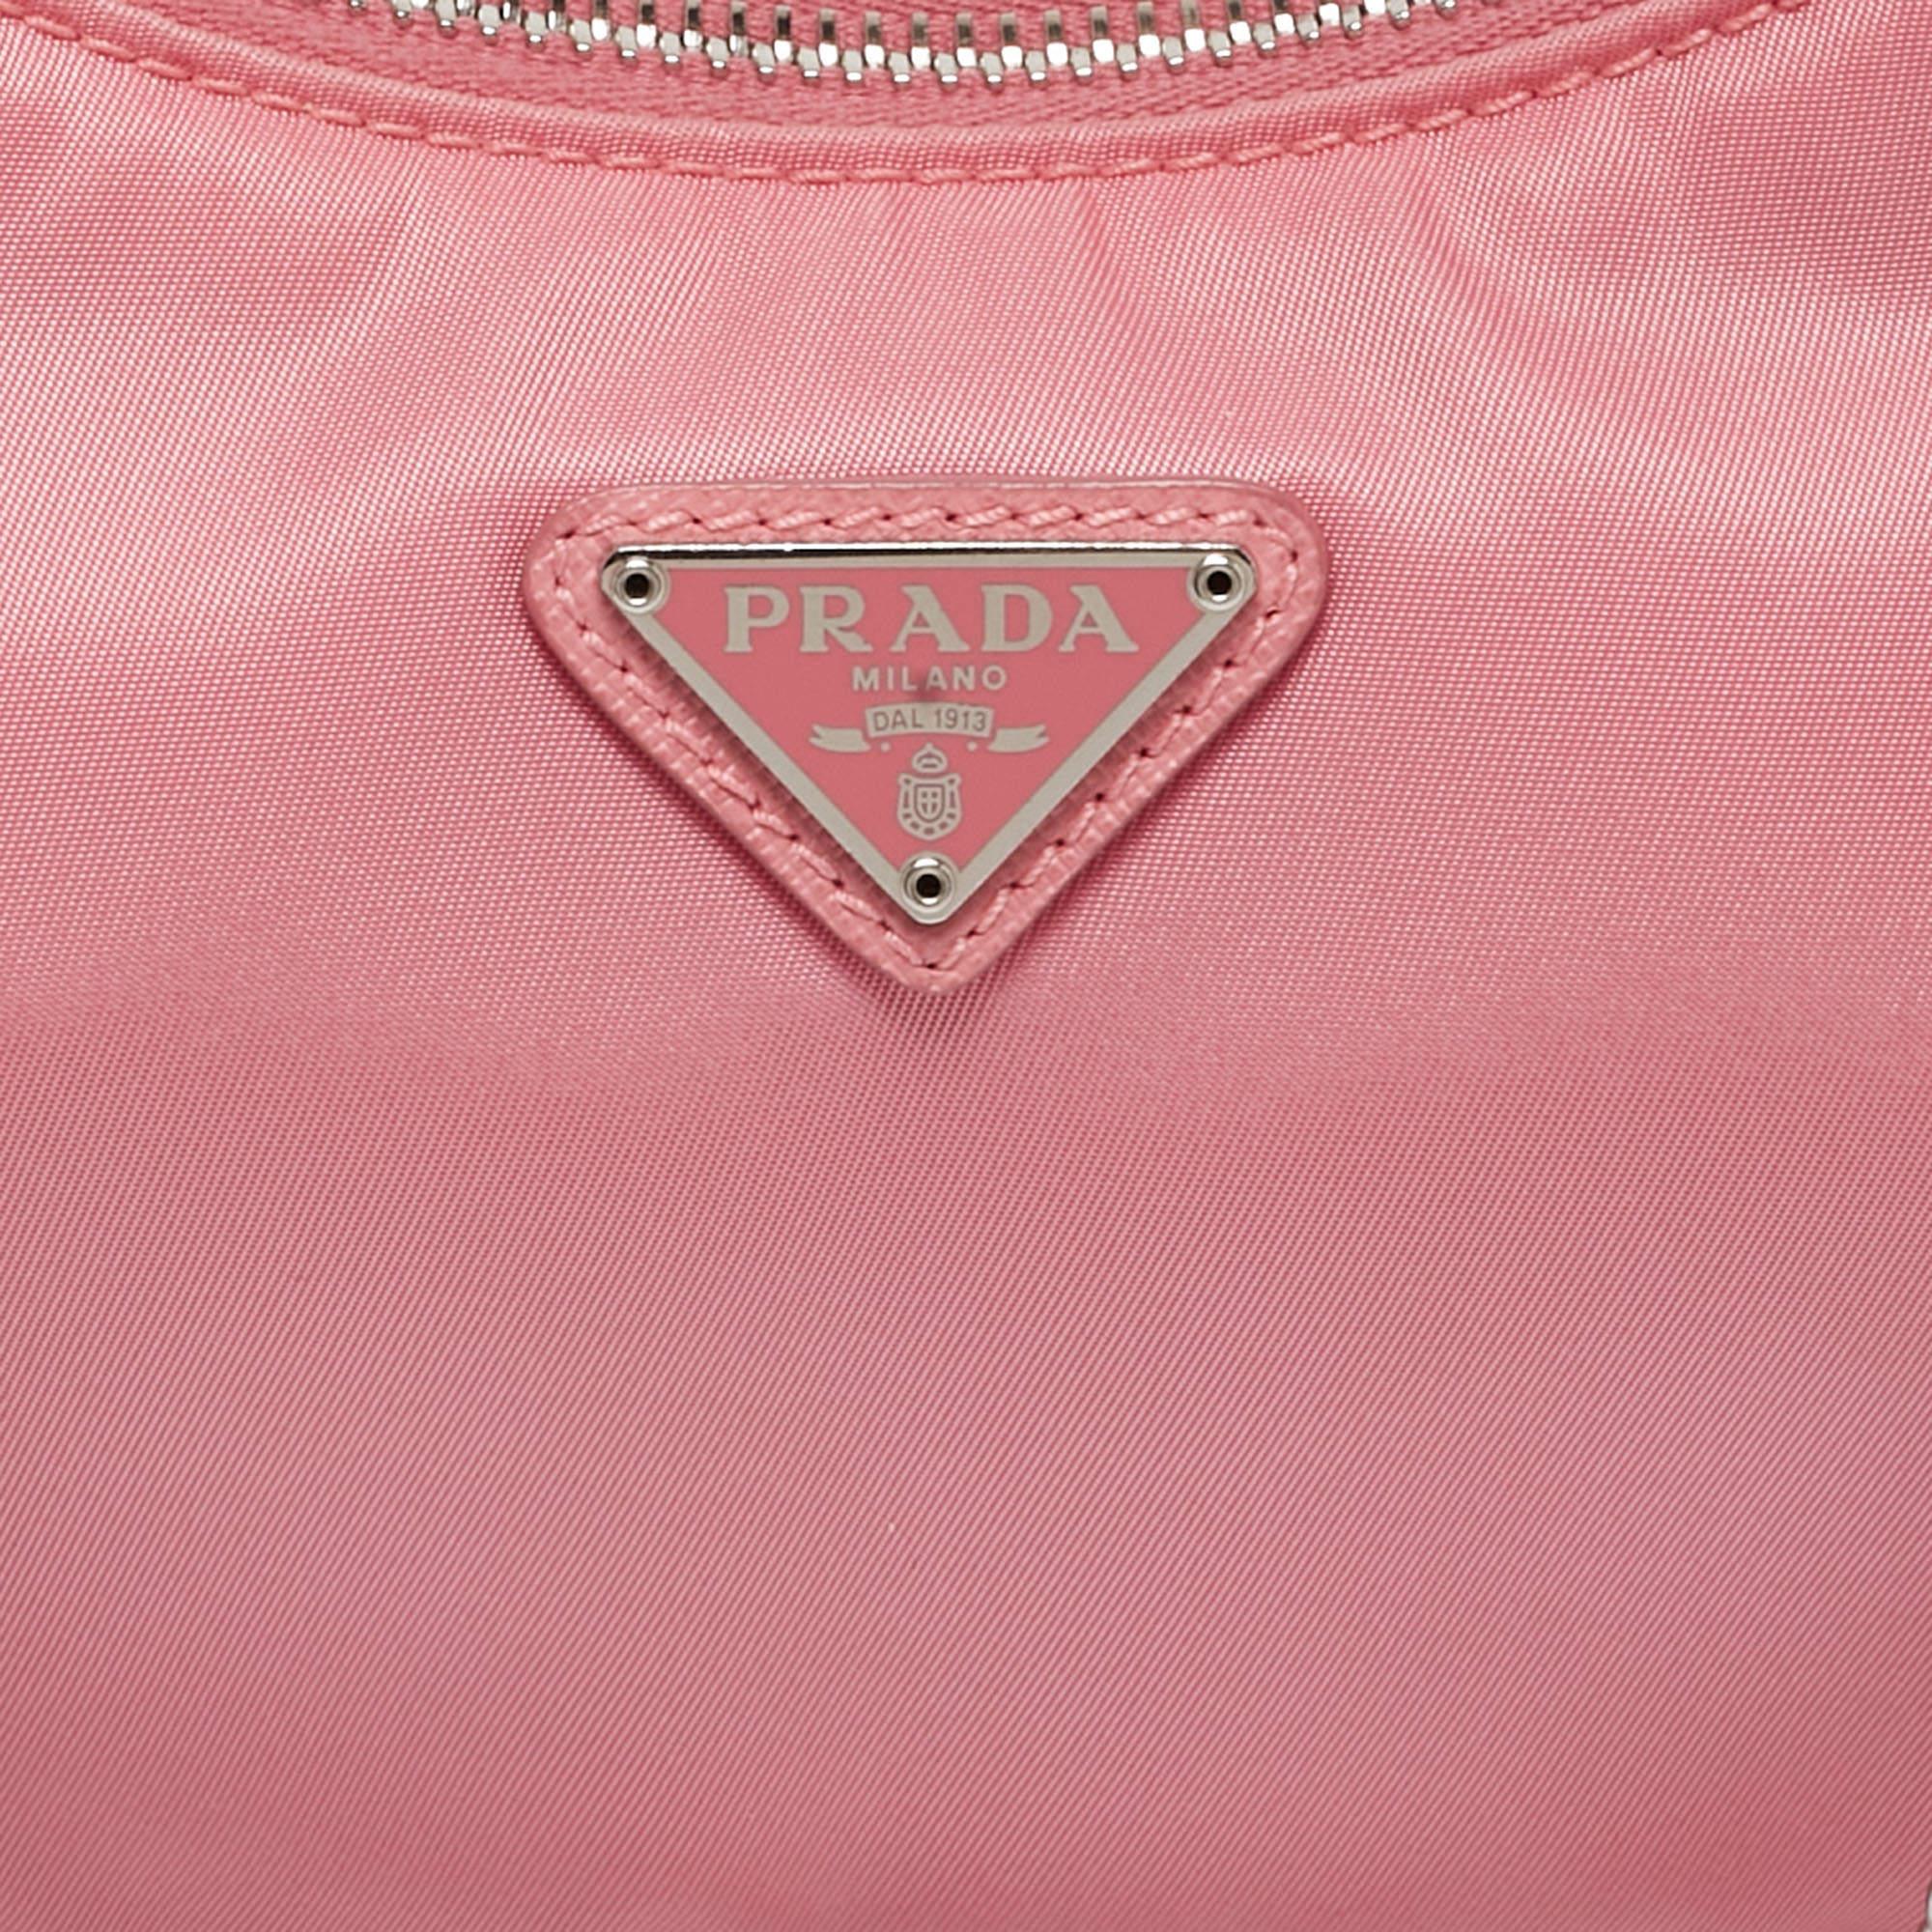 Prada Light Pink Nylon and Leather Re-Edition 2005 Baguette Bag 3